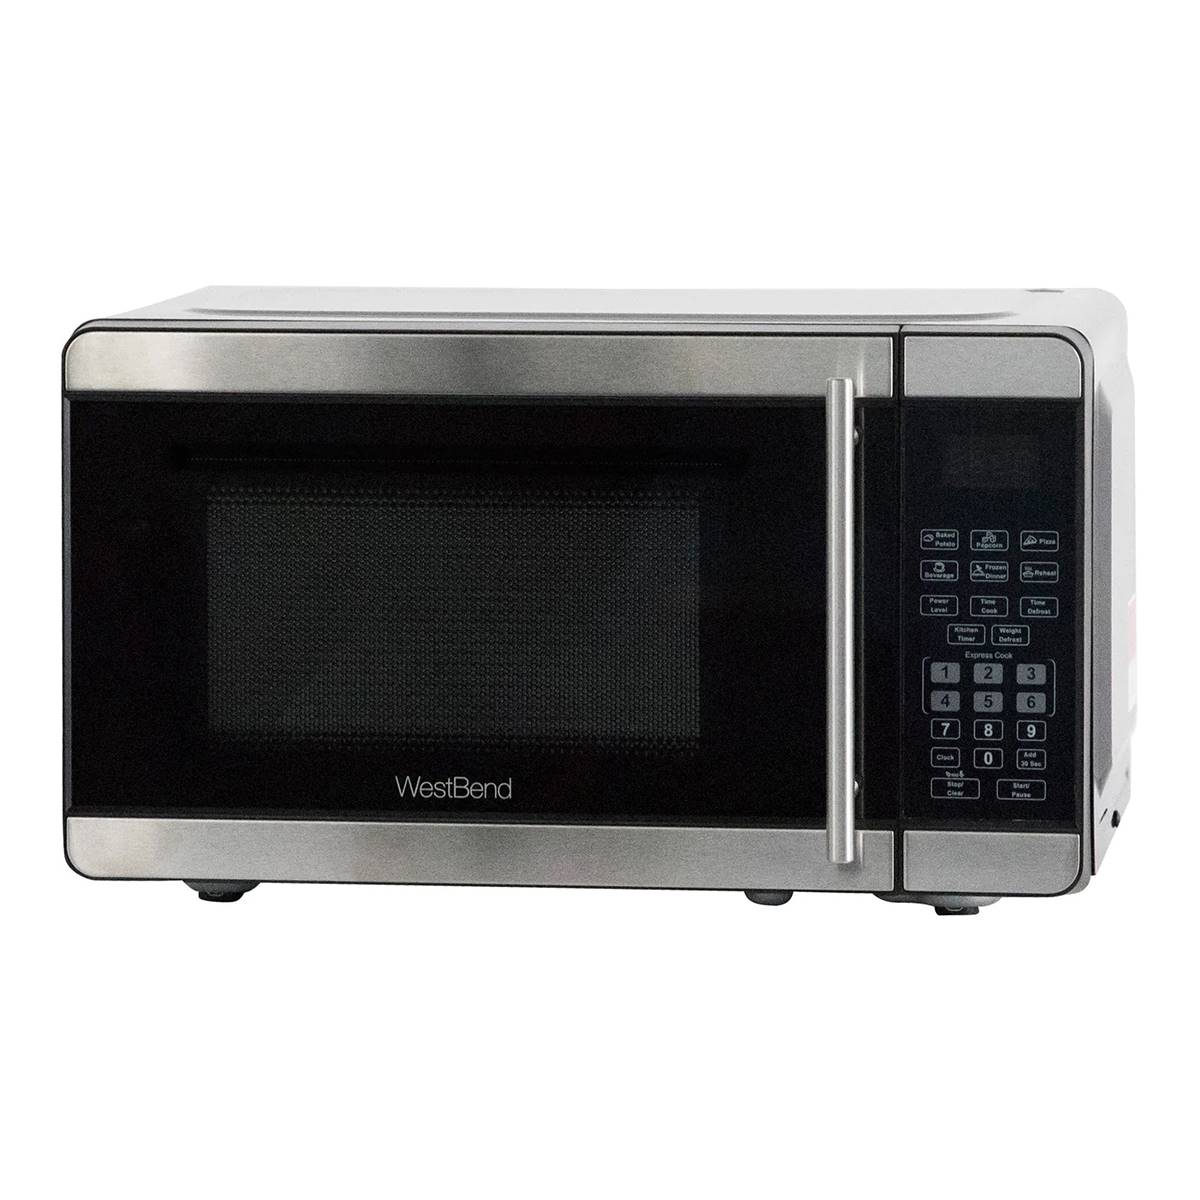 West Bend 0.9 Cu. Ft. Microwave - Stainless Steel